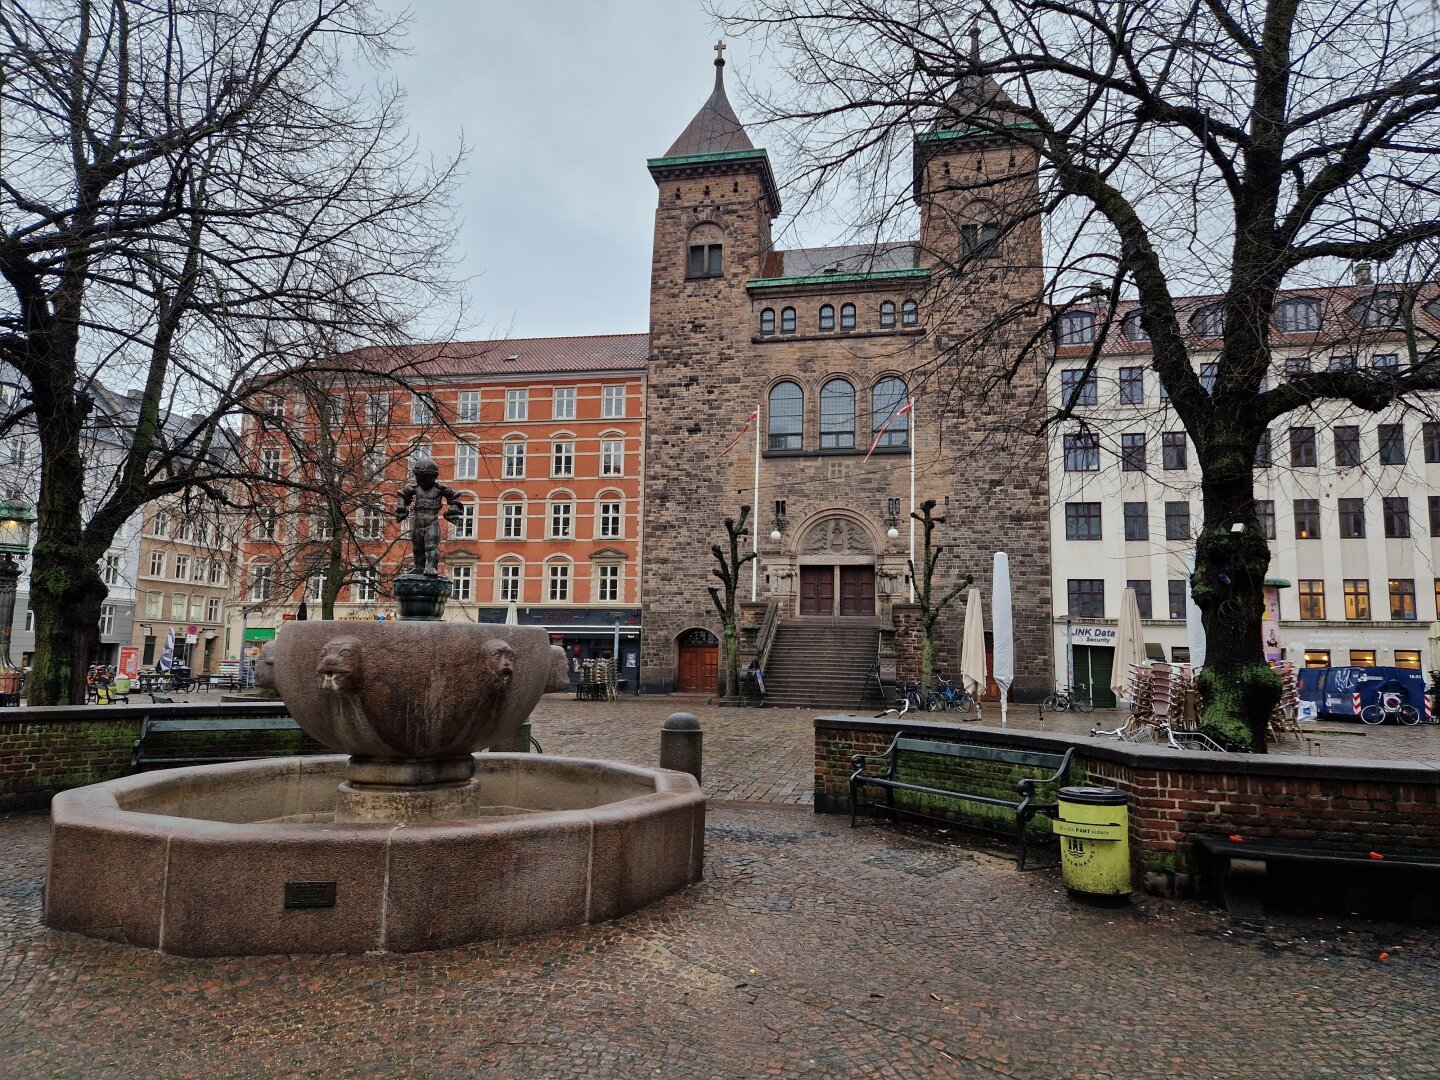 Square with fountain in front and a church in the background.

Fountain: Little Hercules by Rasmus Harboe cirka 1915
Church: Eliaskirken (1908)